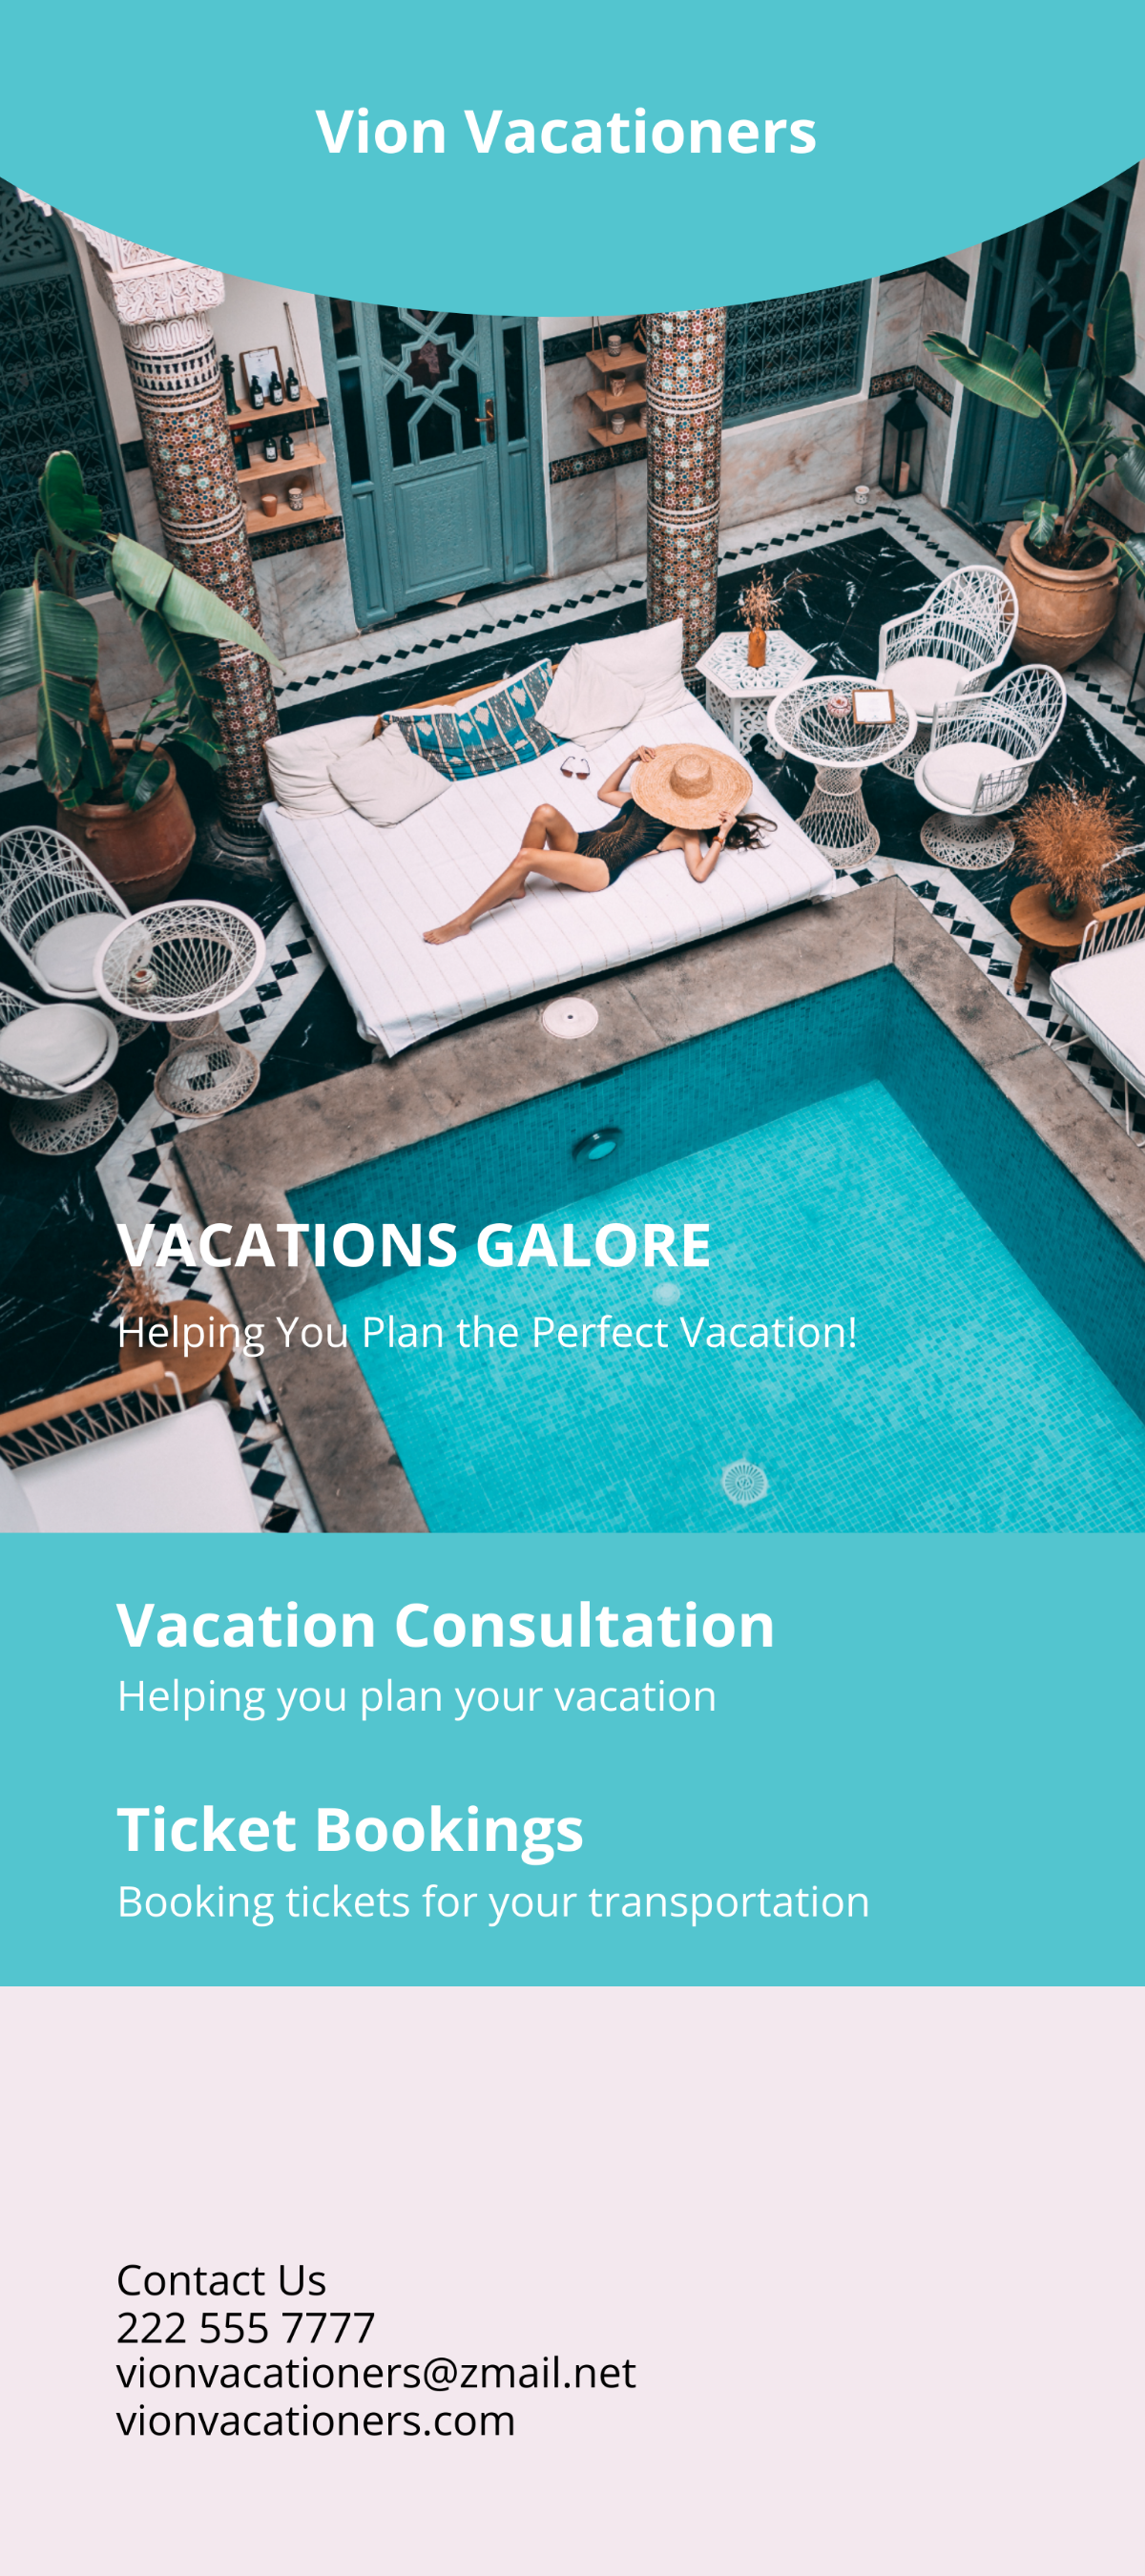 Travel Vacation DL Card Template